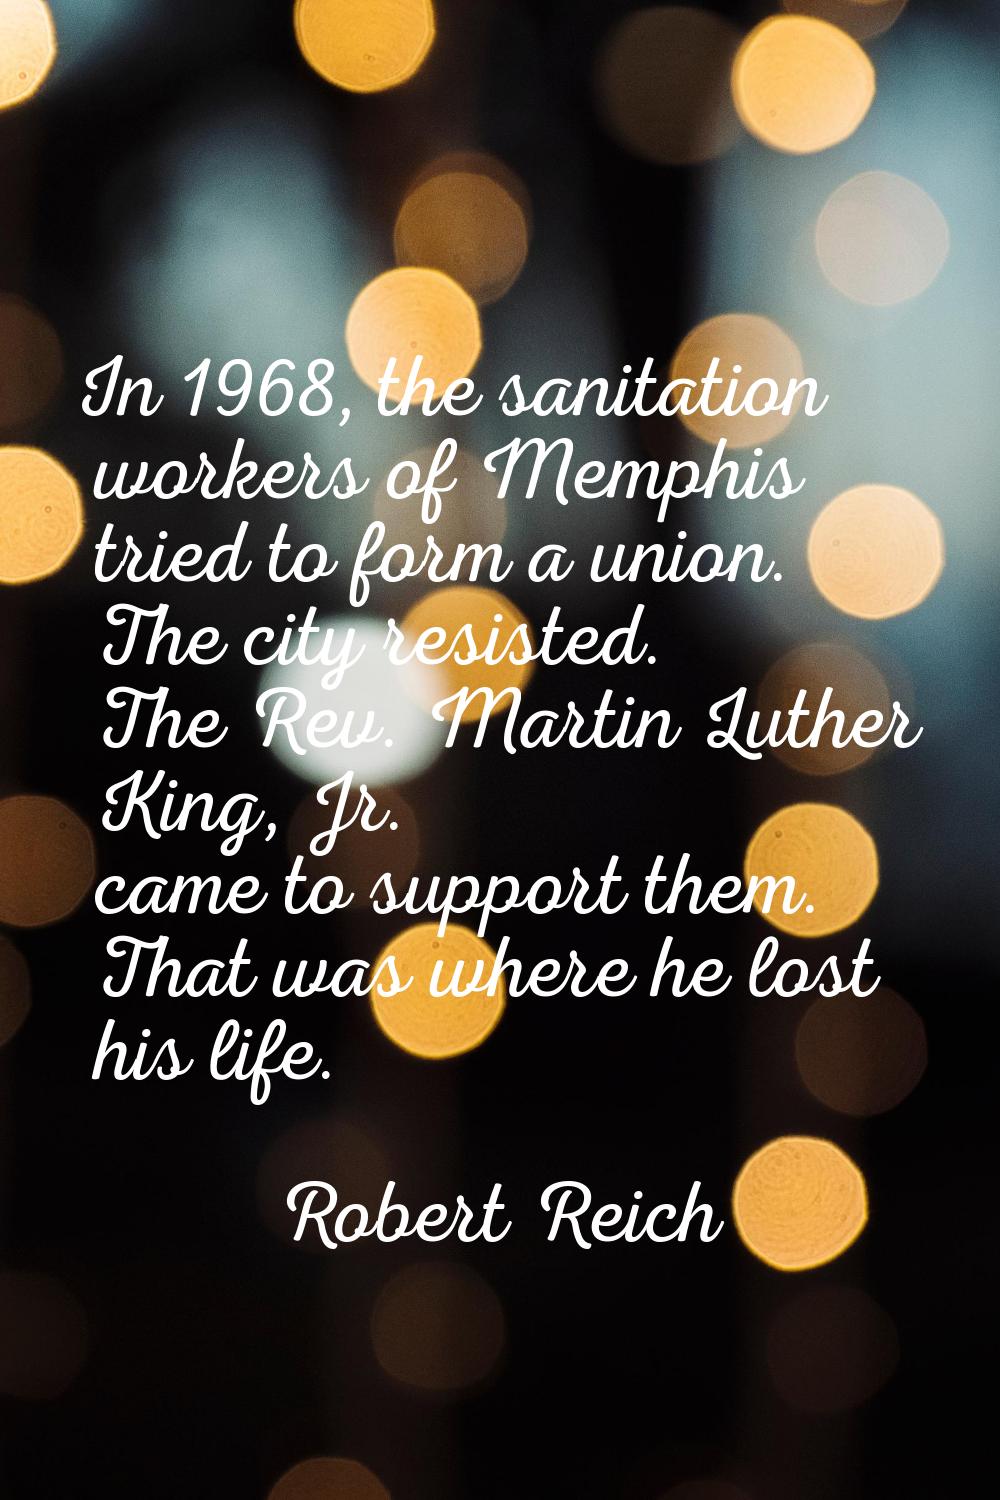 In 1968, the sanitation workers of Memphis tried to form a union. The city resisted. The Rev. Marti